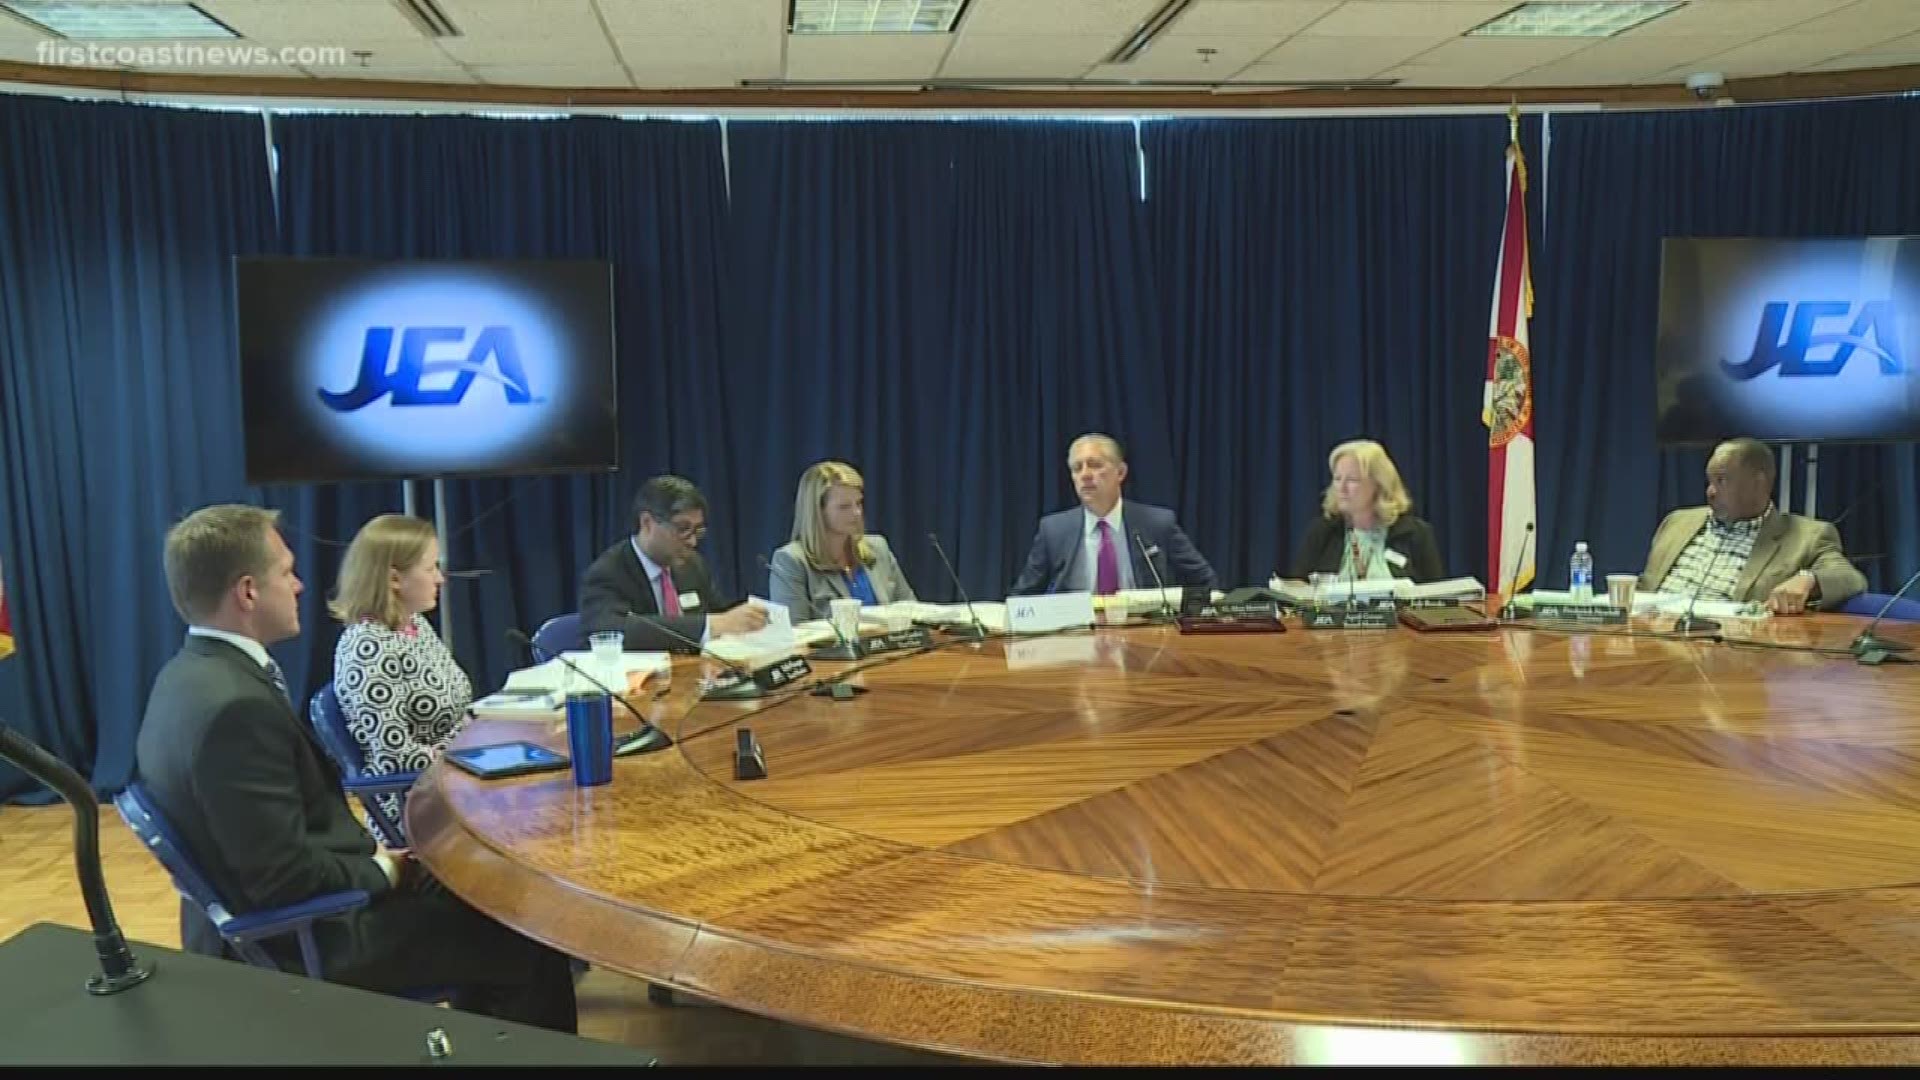 Amid JEA sale frenzy, Jacksonville City Council member receives job offer